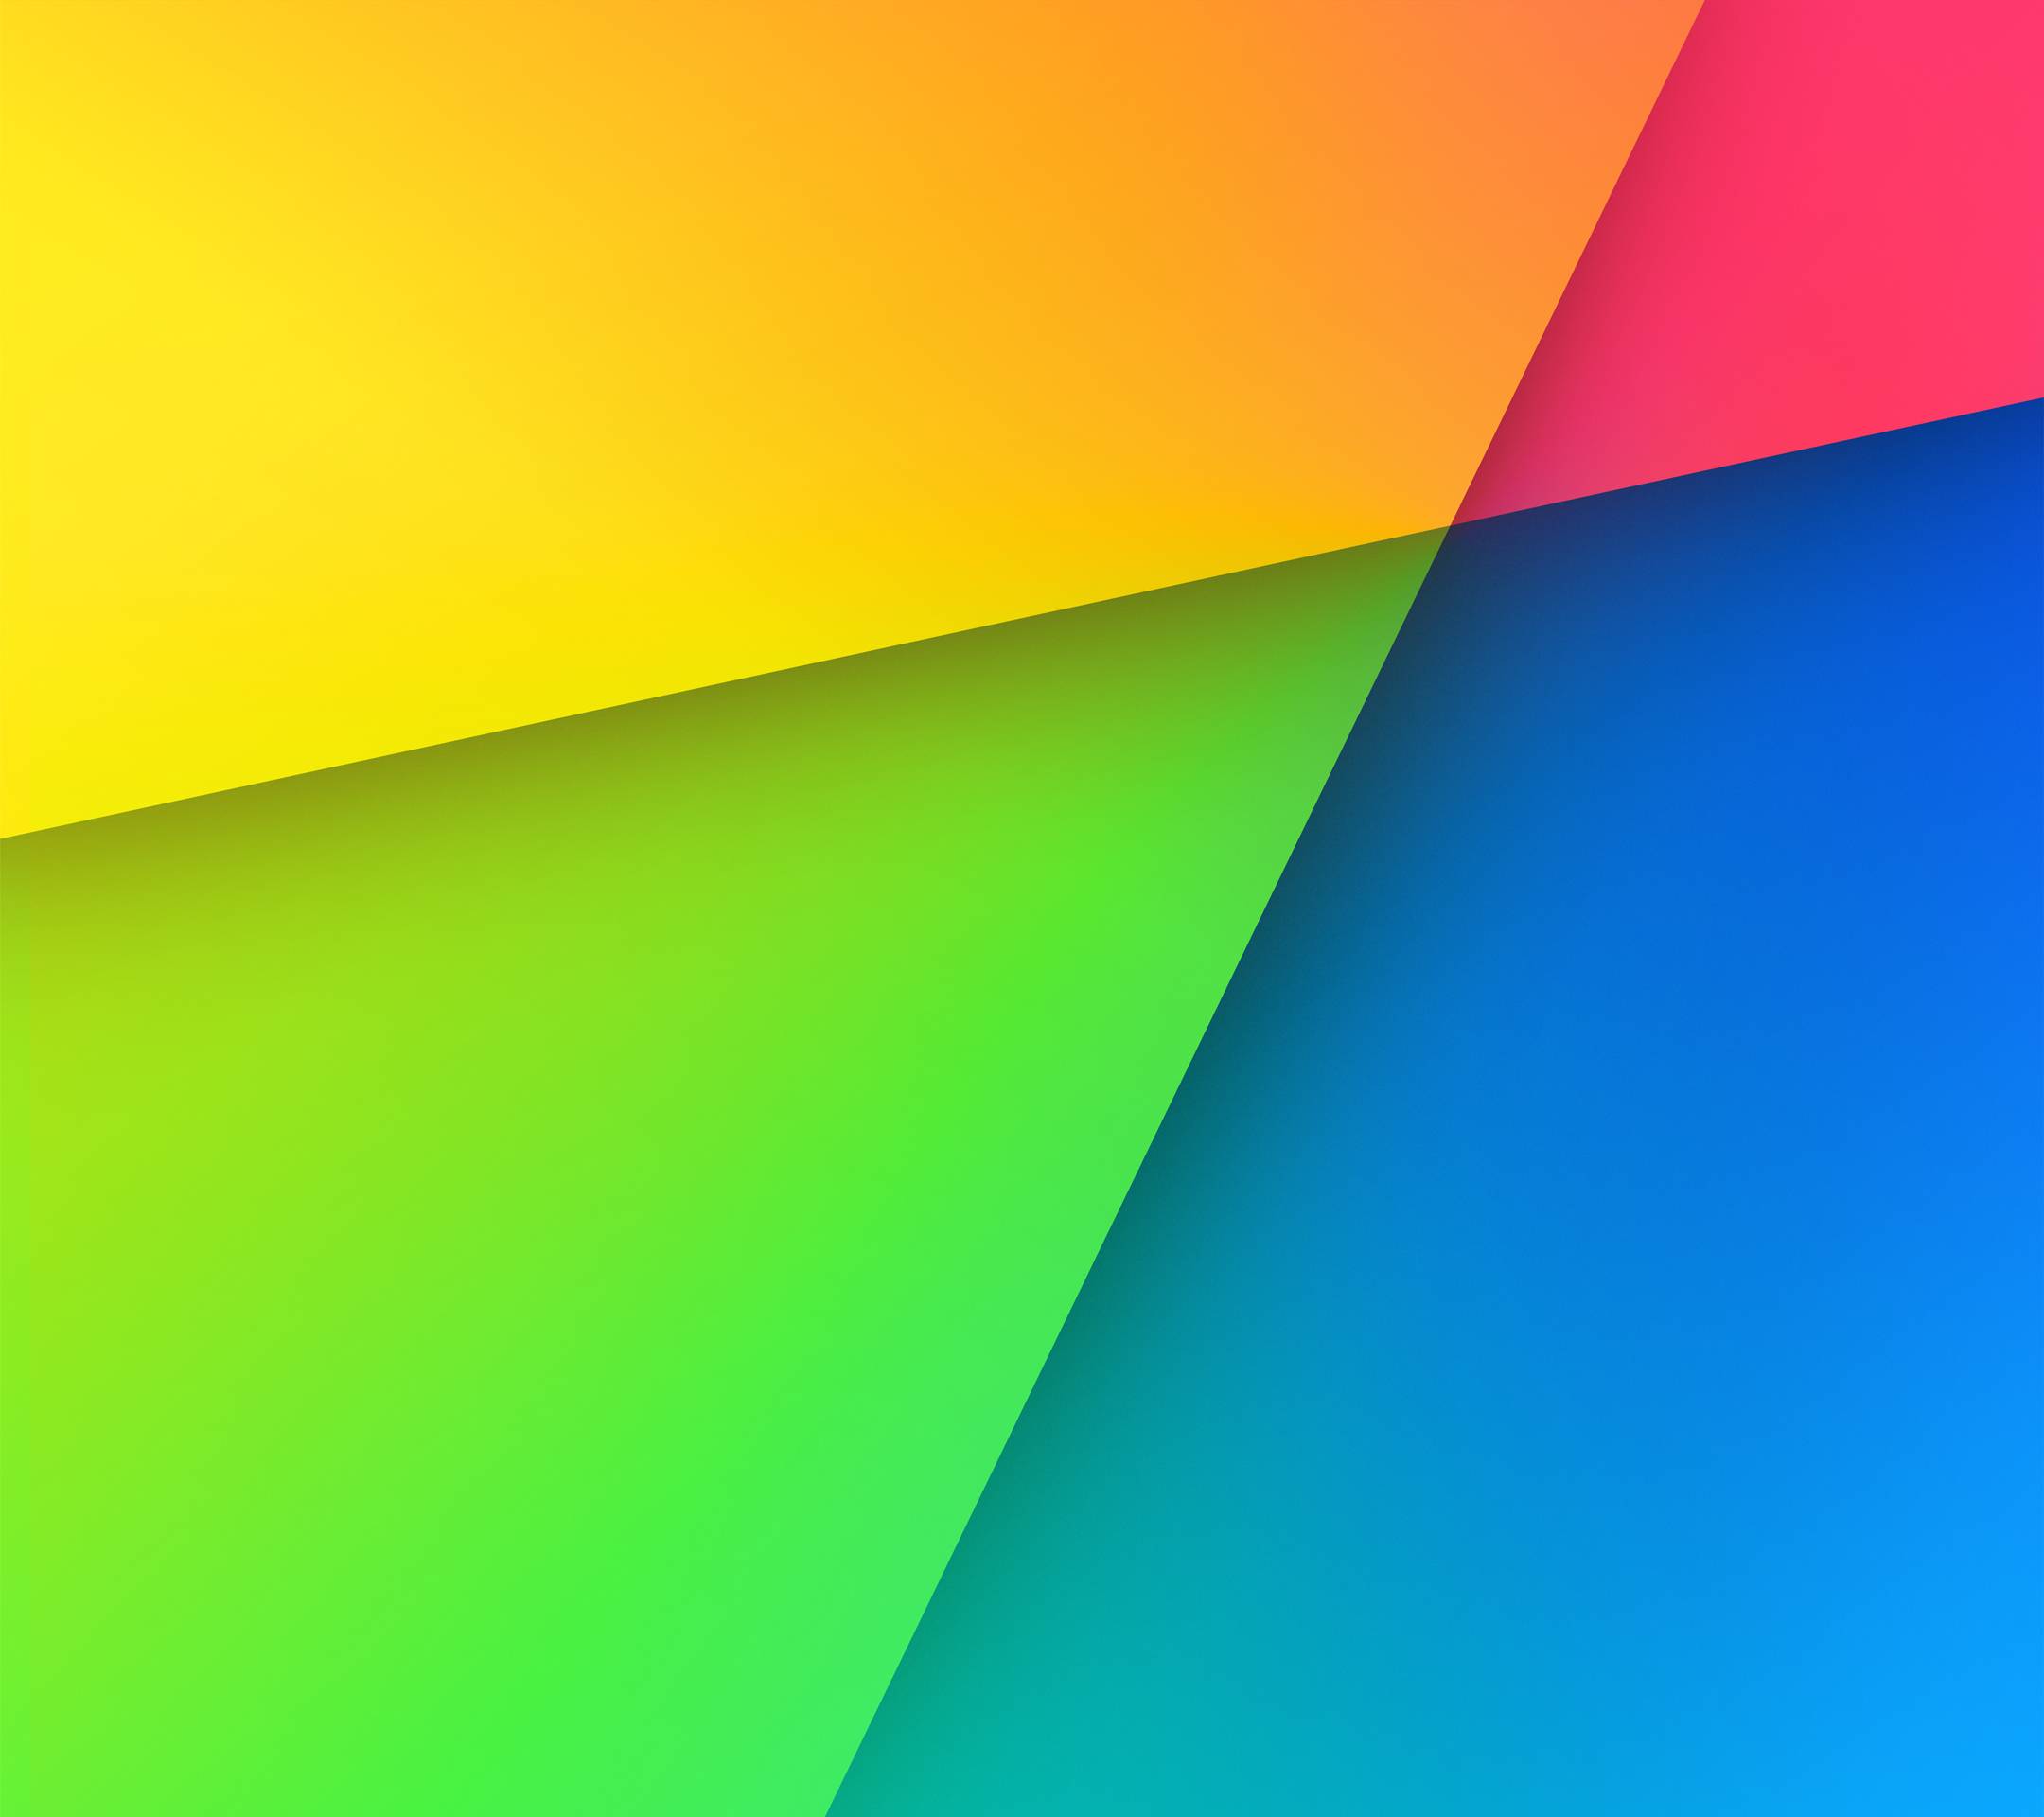 Download New Nexus 7 and Android 4.3 Wallpapers. [HD] | AxeeTech